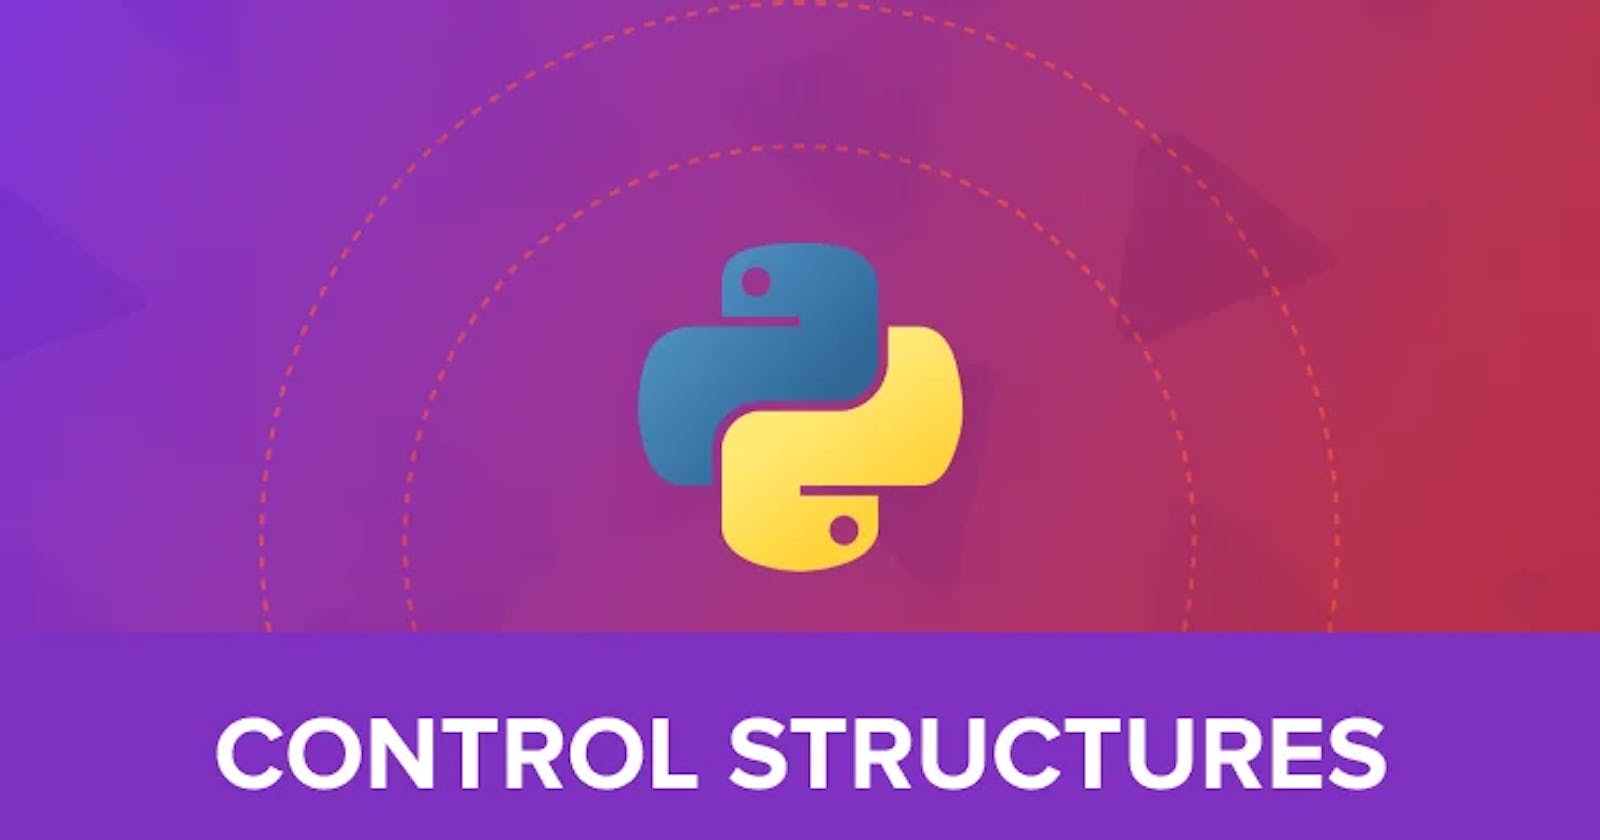 Control Structures in Python